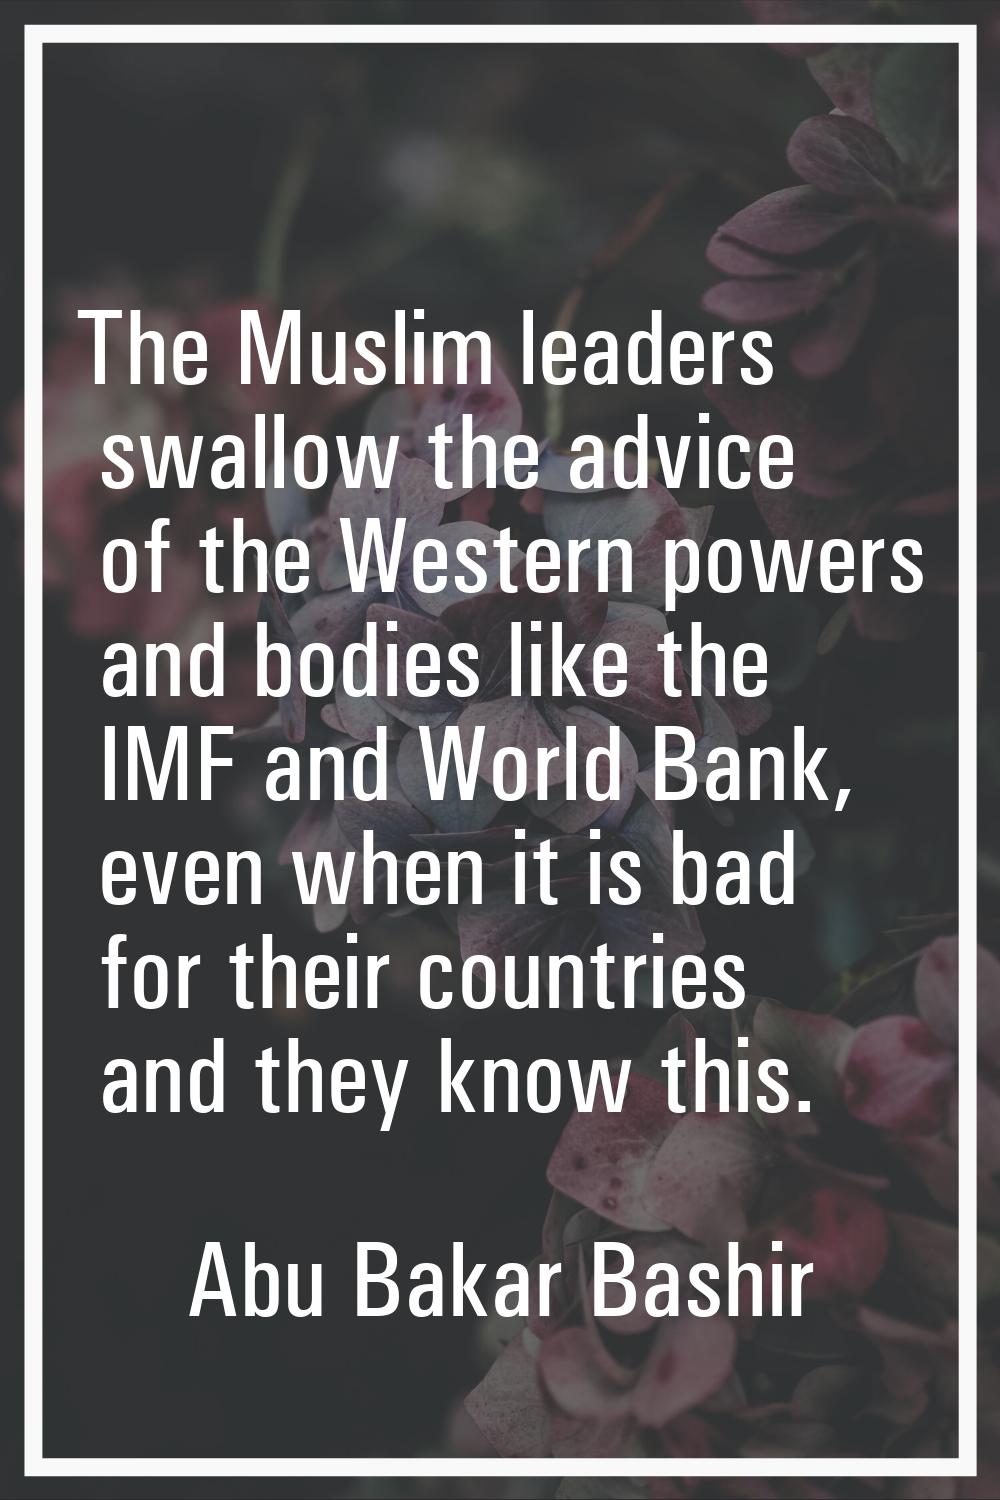 The Muslim leaders swallow the advice of the Western powers and bodies like the IMF and World Bank,